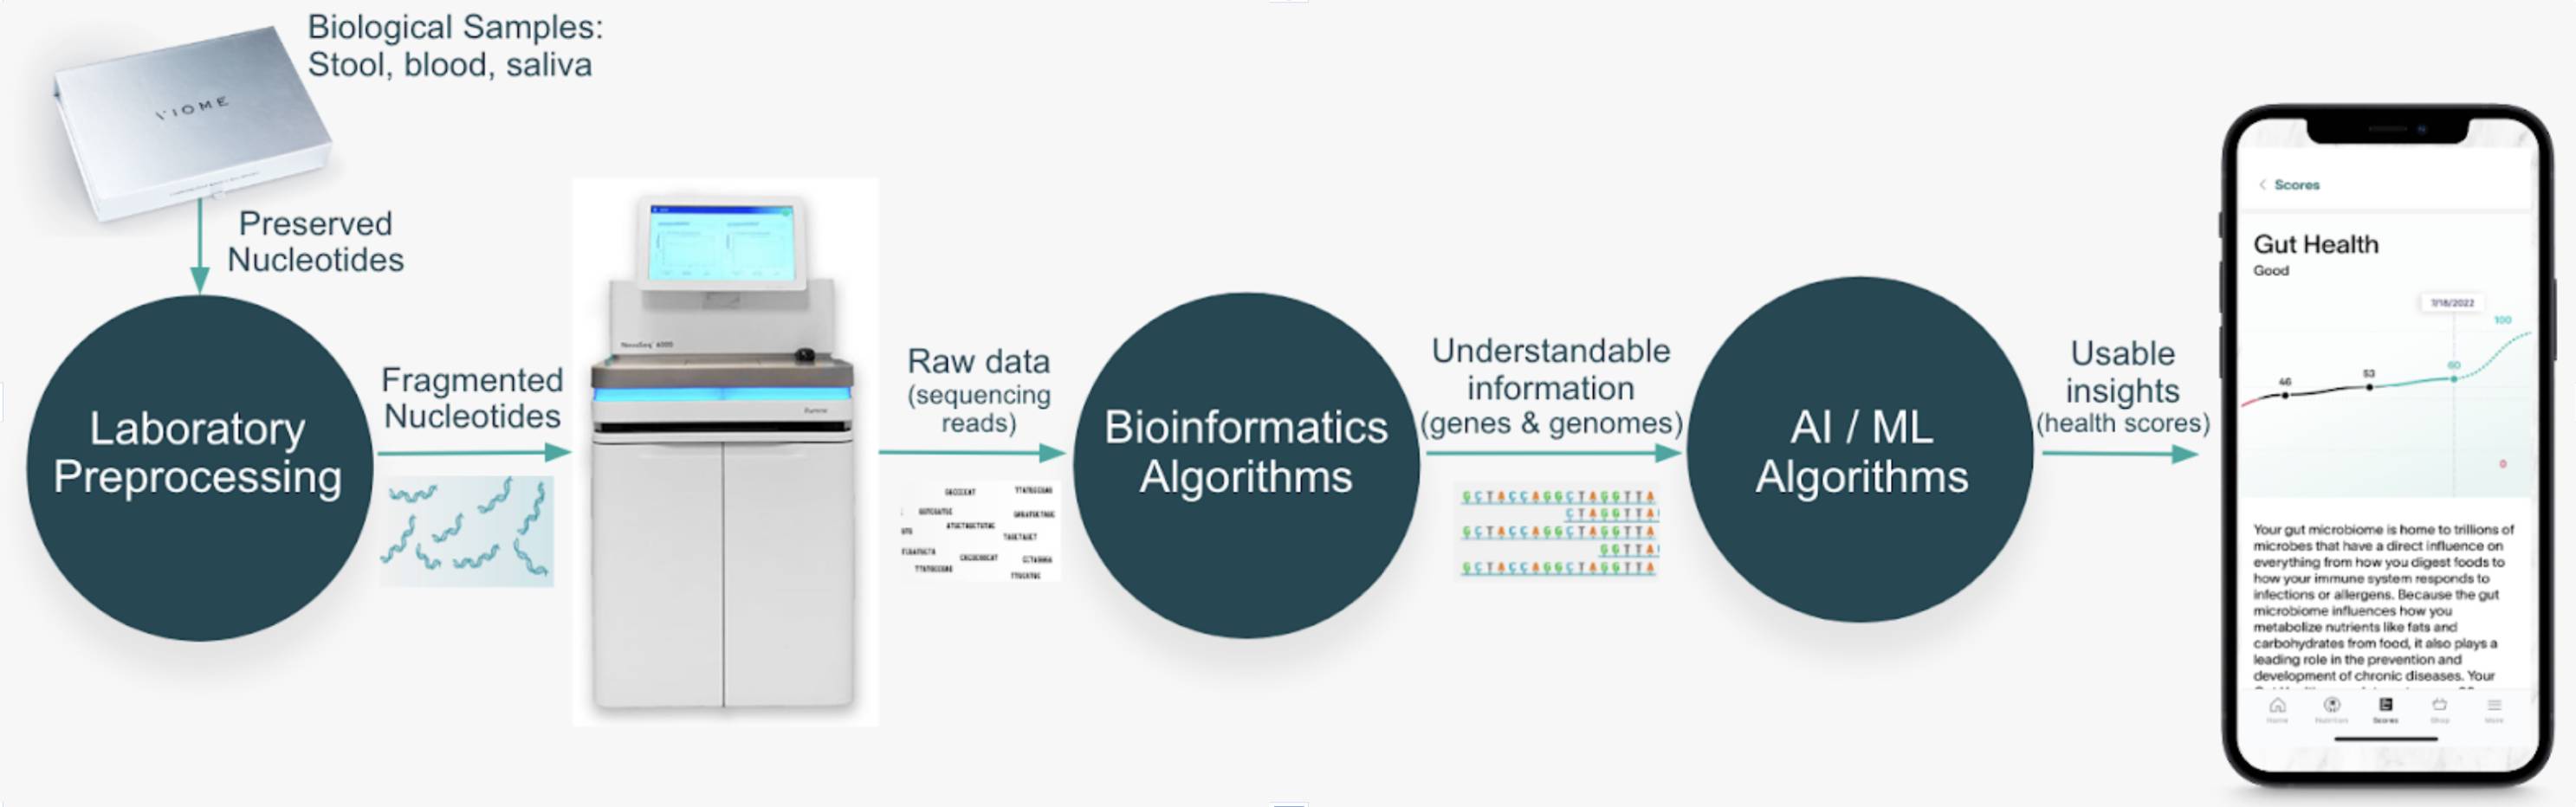 biological-data-to-molecular-pathways-to-health-insights